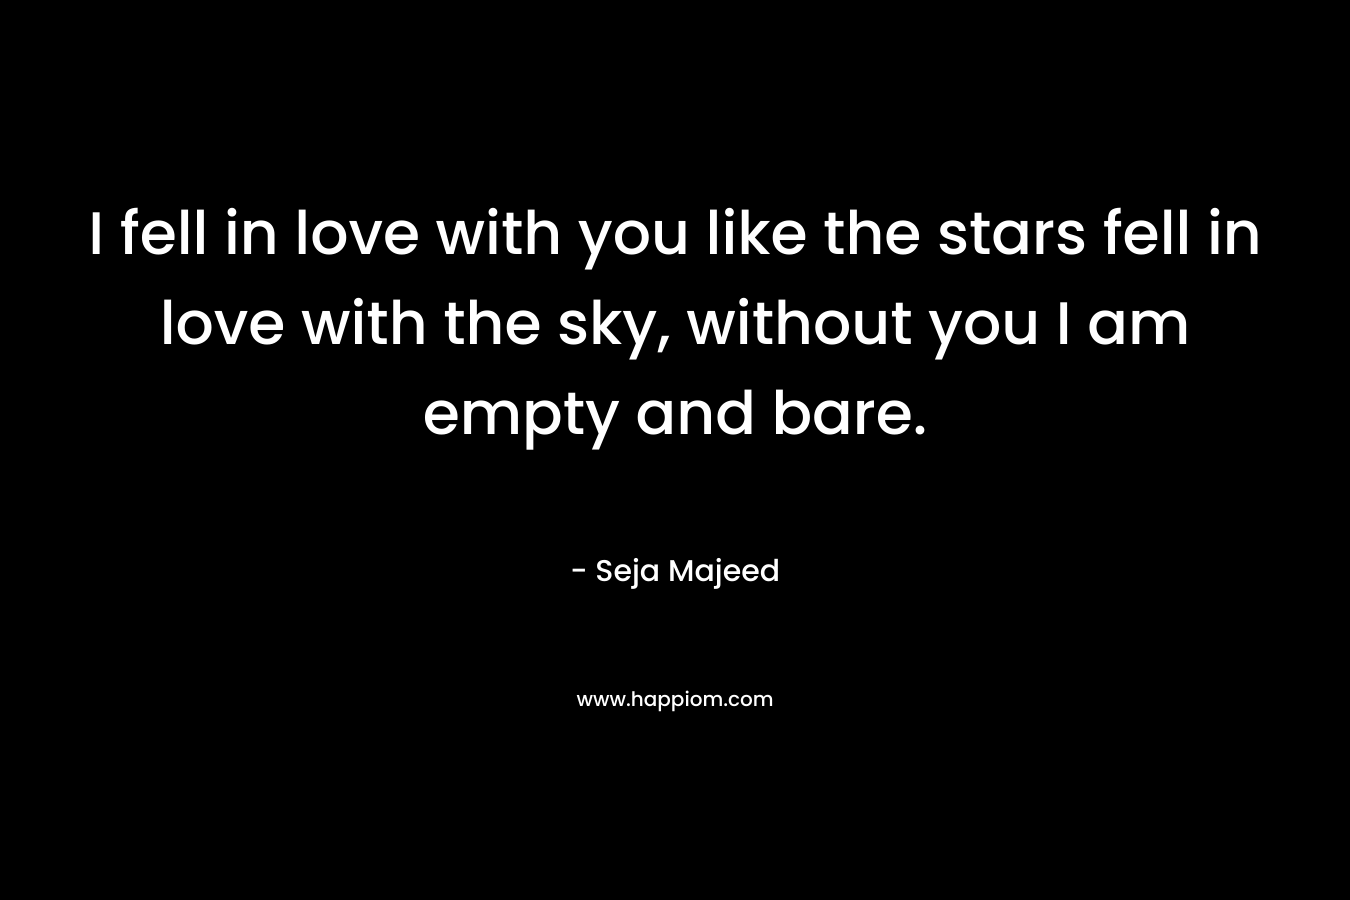 I fell in love with you like the stars fell in love with the sky, without you I am empty and bare.